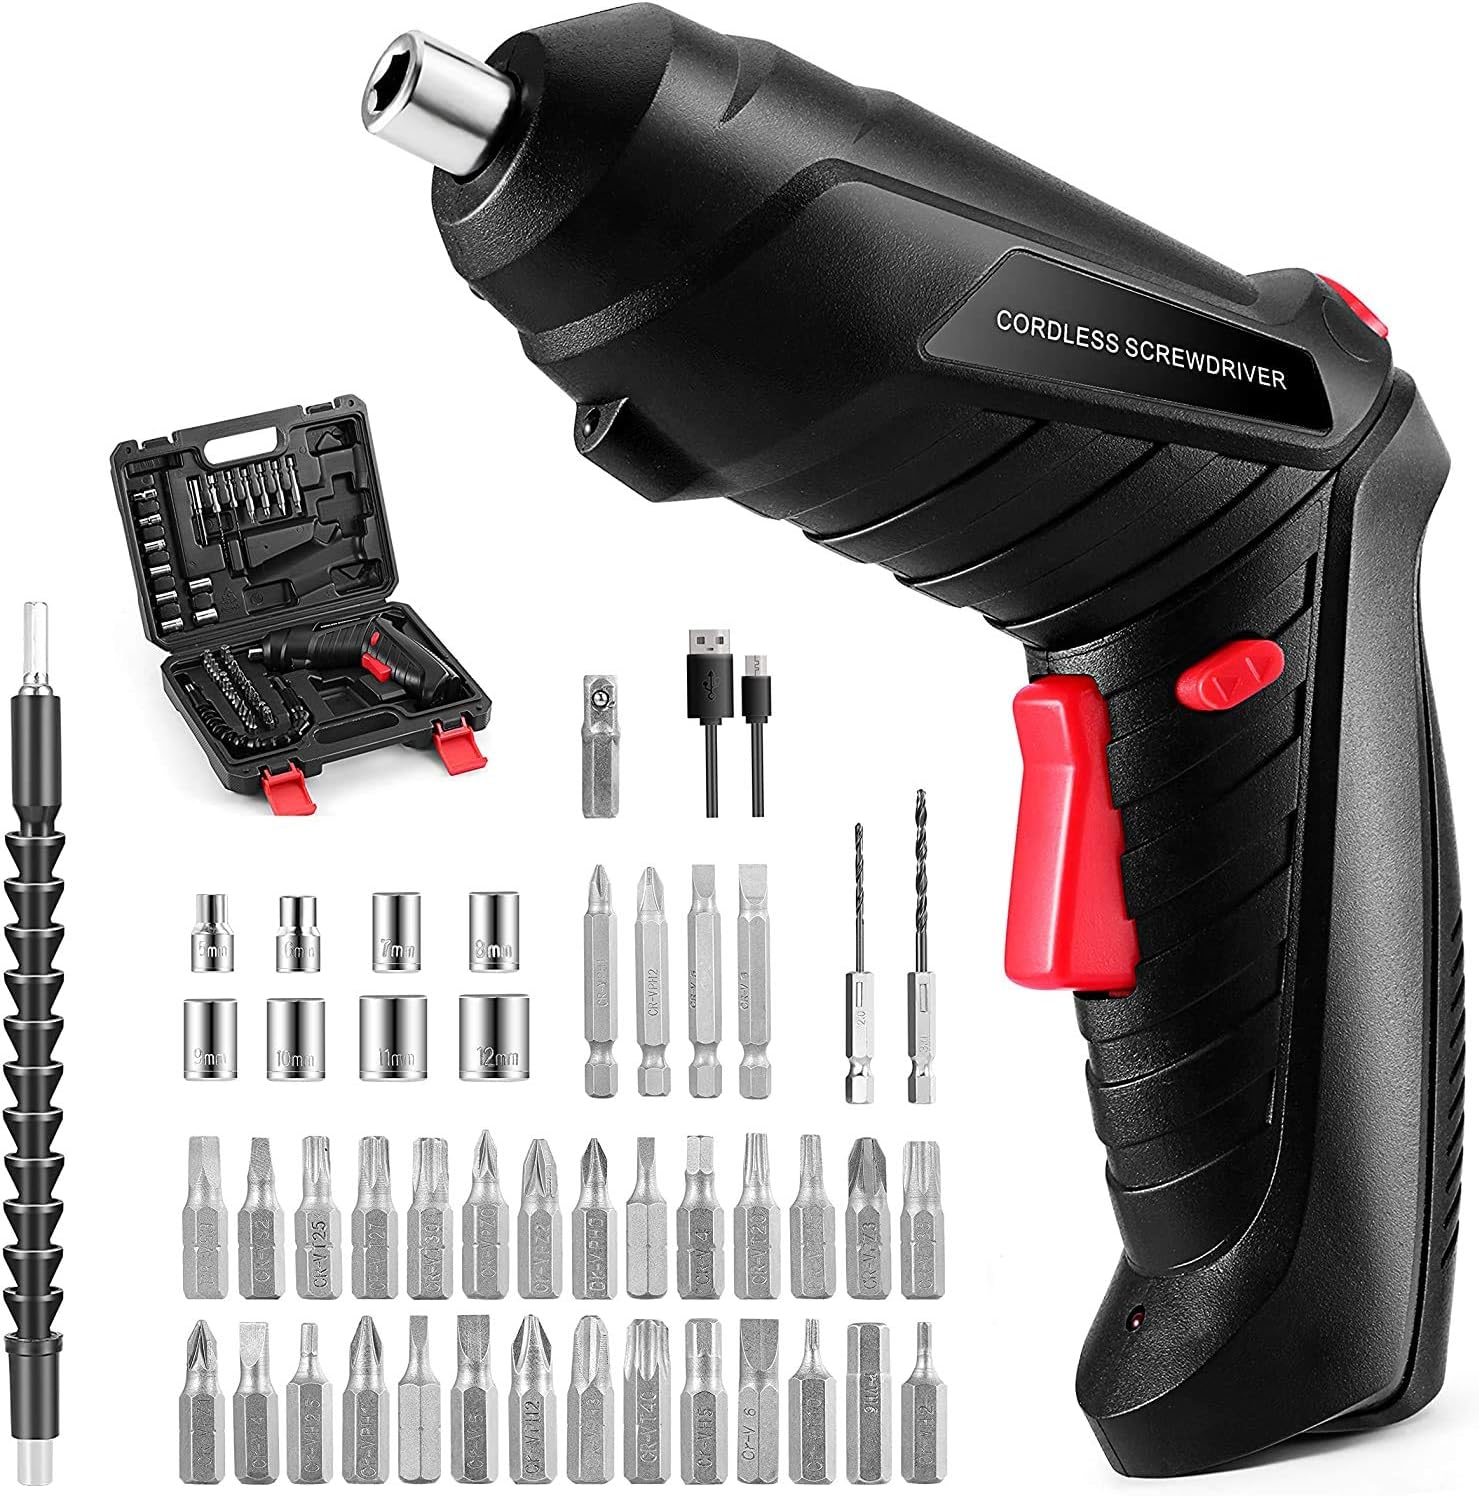 AccLoo Cordless Electric Cordless Screwdriver Drill with Built-in LED, 1300mAh (Black)